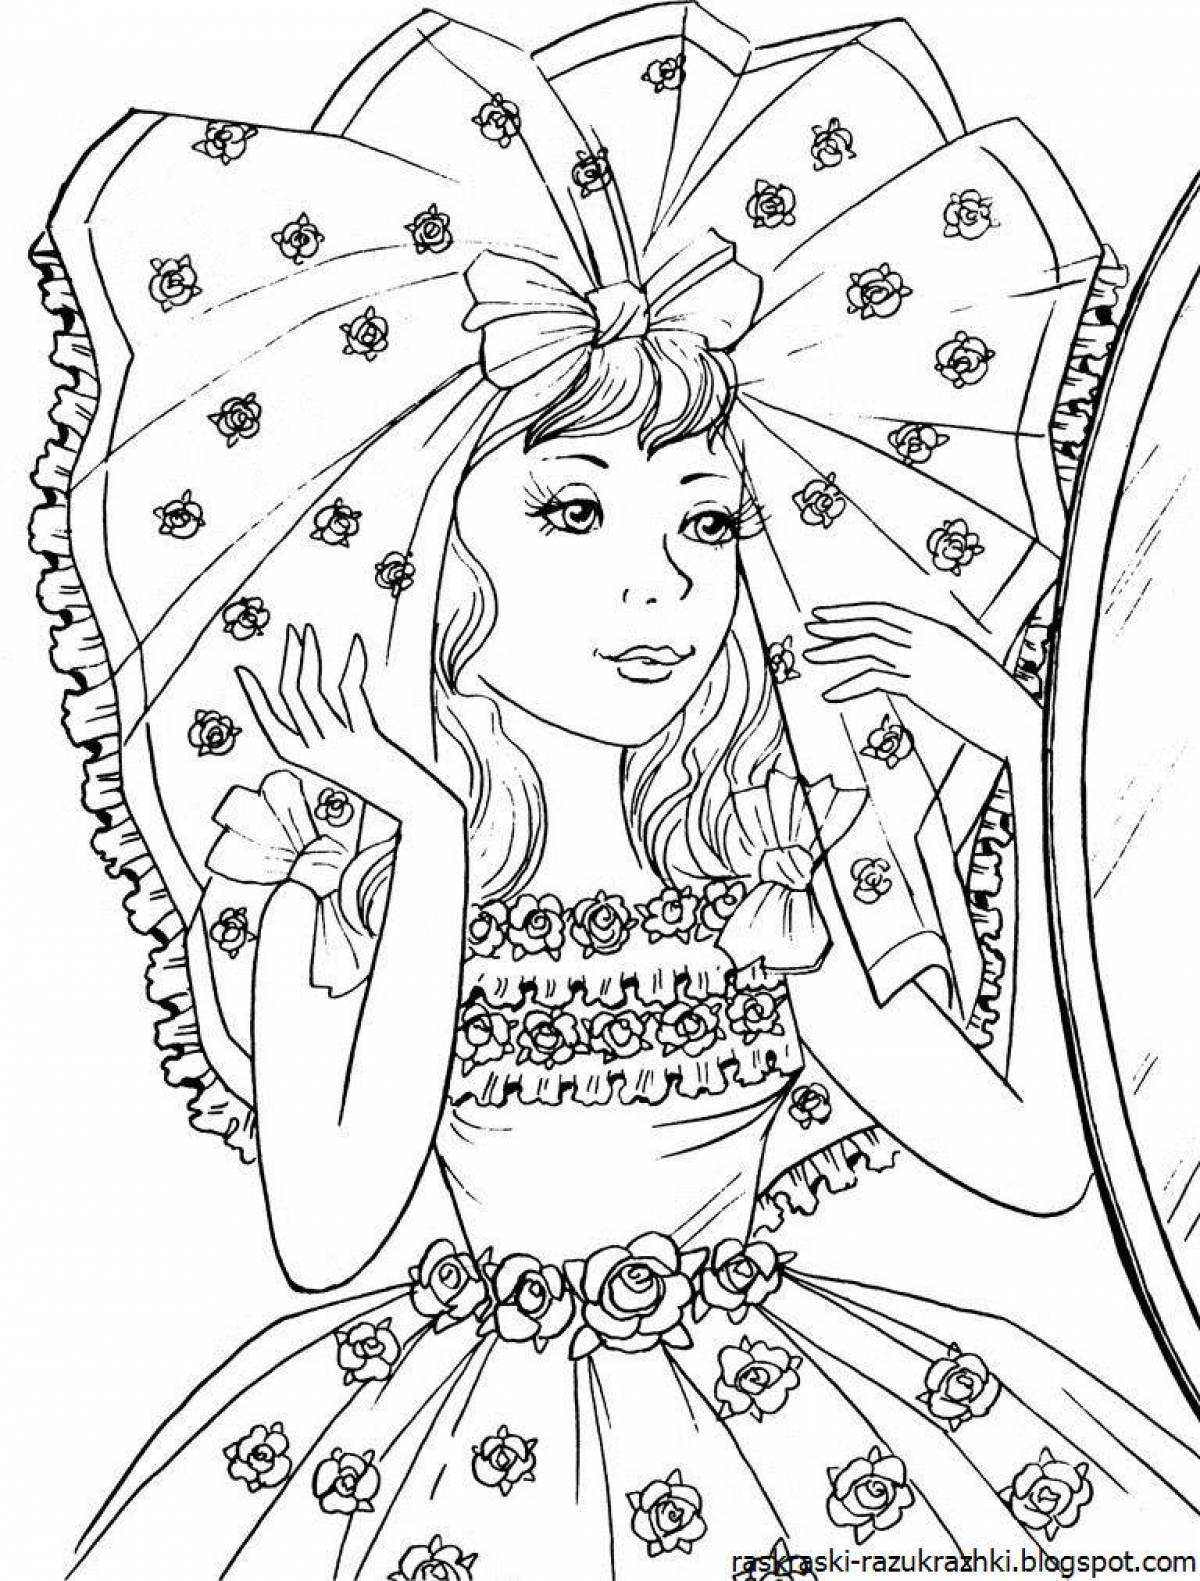 Great coloring book for girls 10 years old